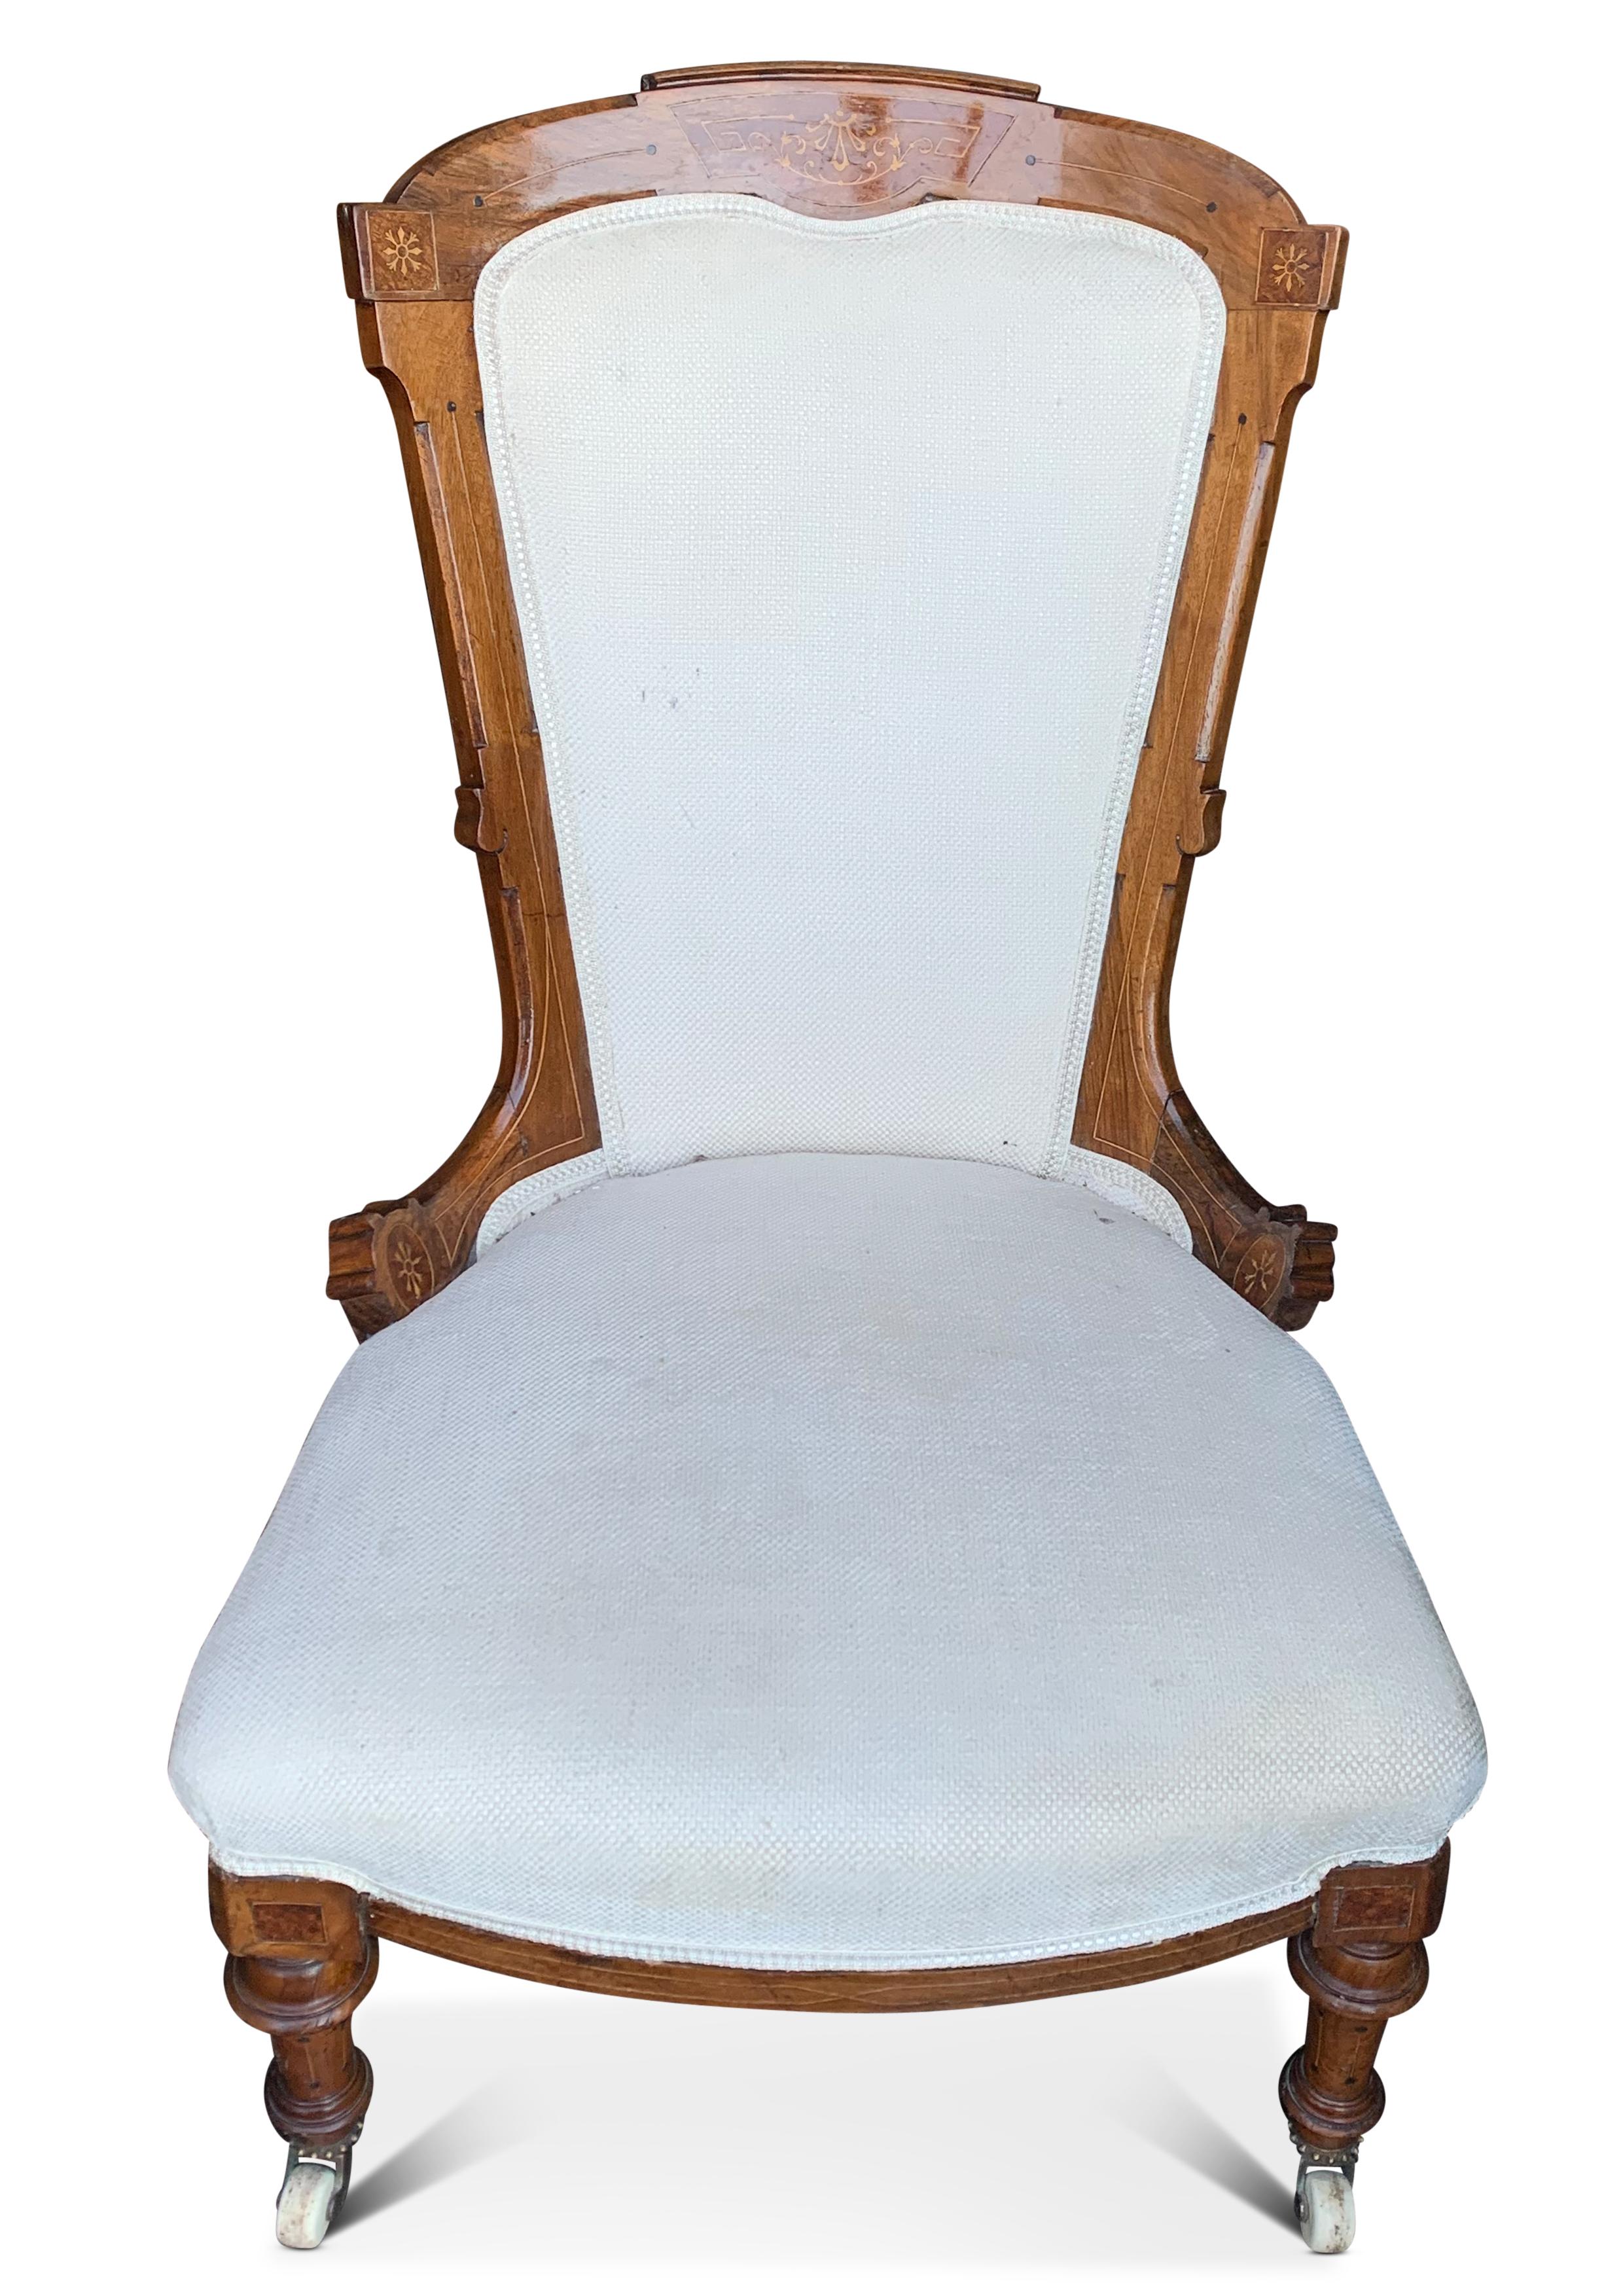 An Empire Walnut Upholstered Salon Chair With Decorative Inlay & Ceramic Castors 1800s


